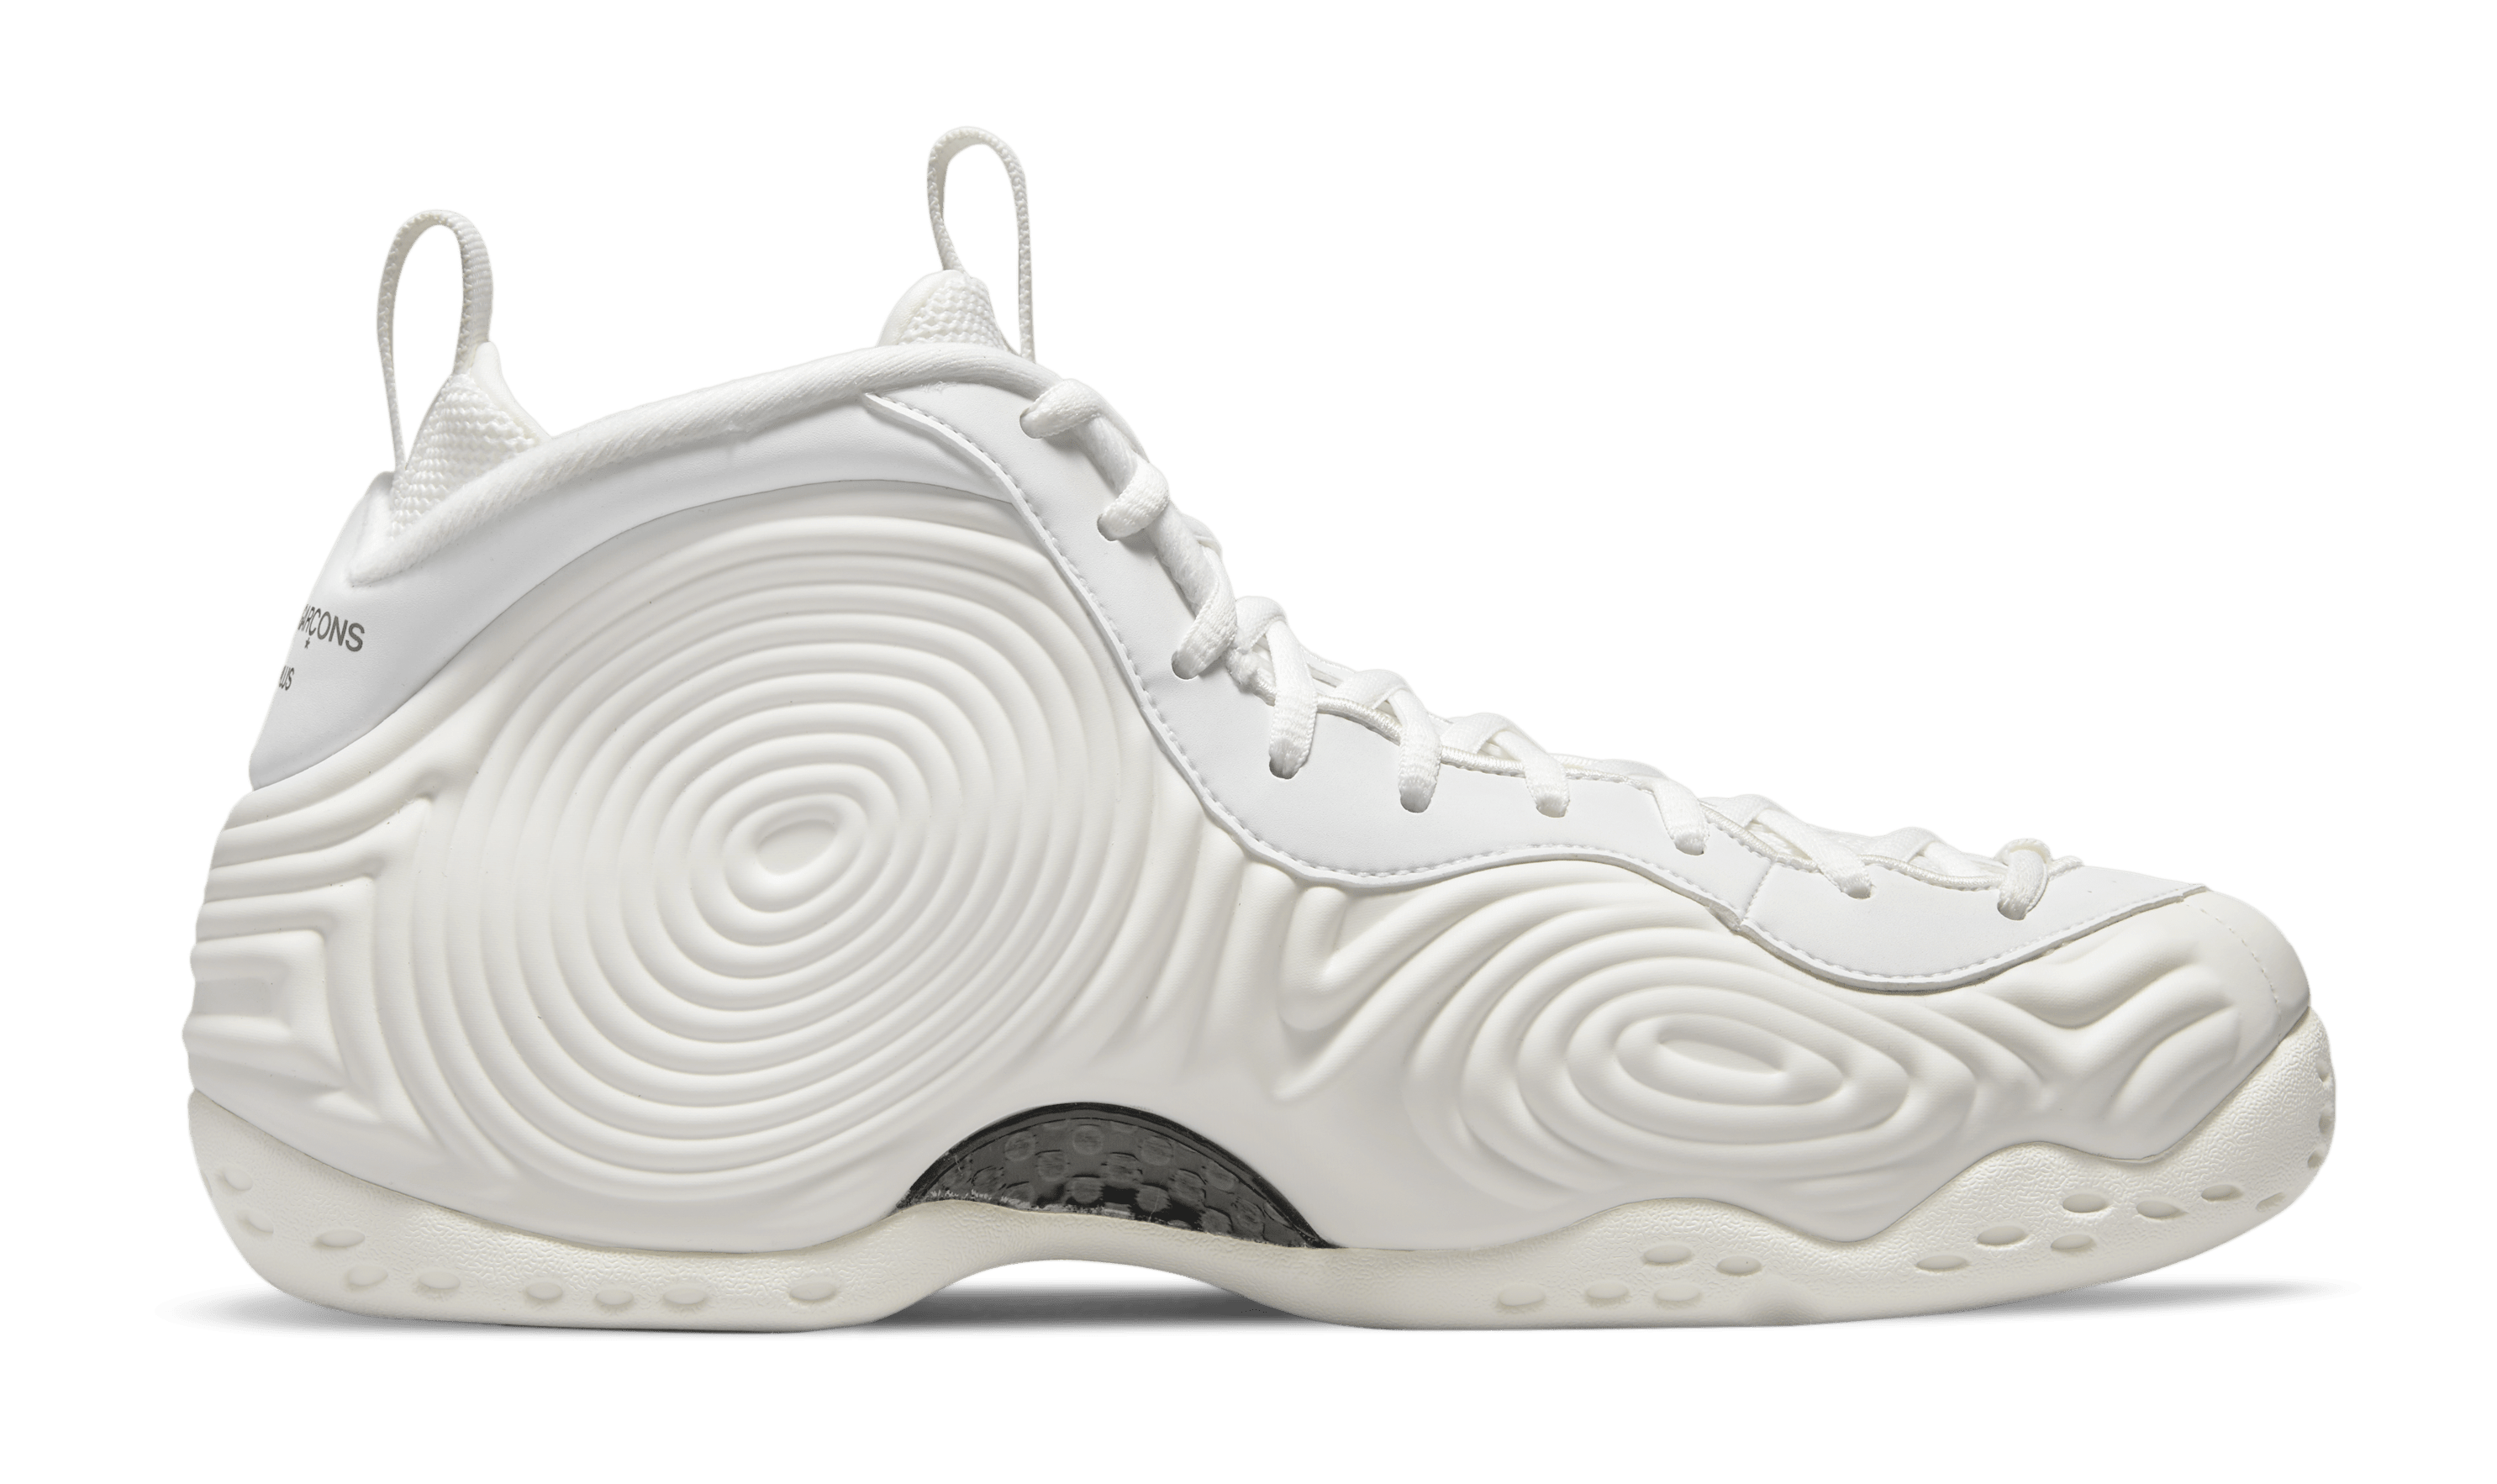 Comme des Garcons x Nike Air Foamposite One Release Date | Sole 